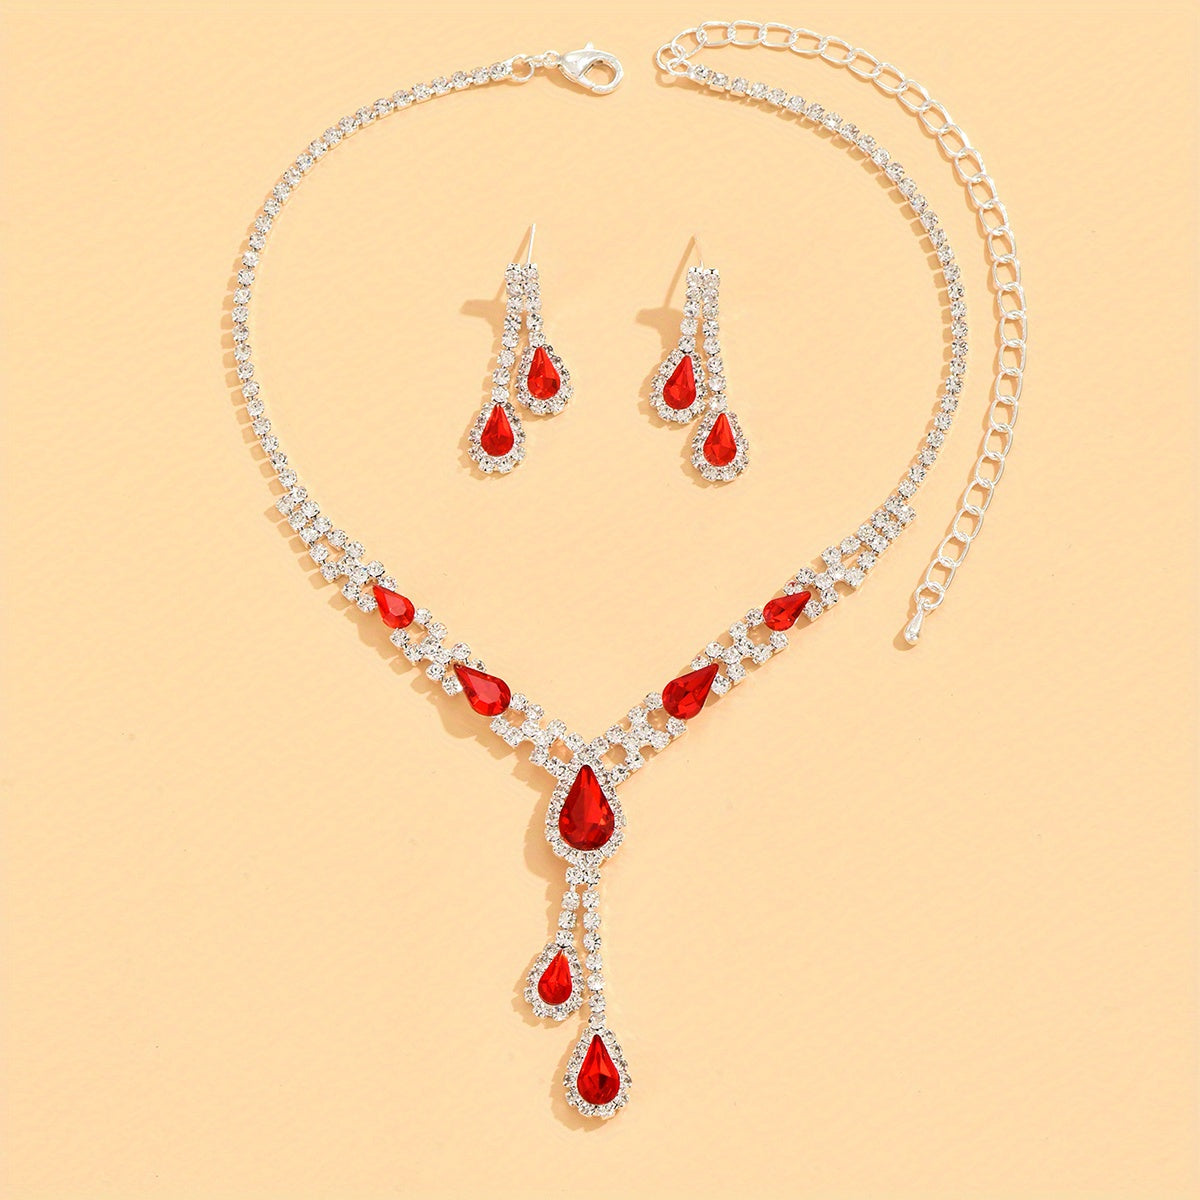 Elegant Rhinestone Jewelry Set for Women - Perfect Mother's Day Gift with Pendant Necklace and Drop Earrings